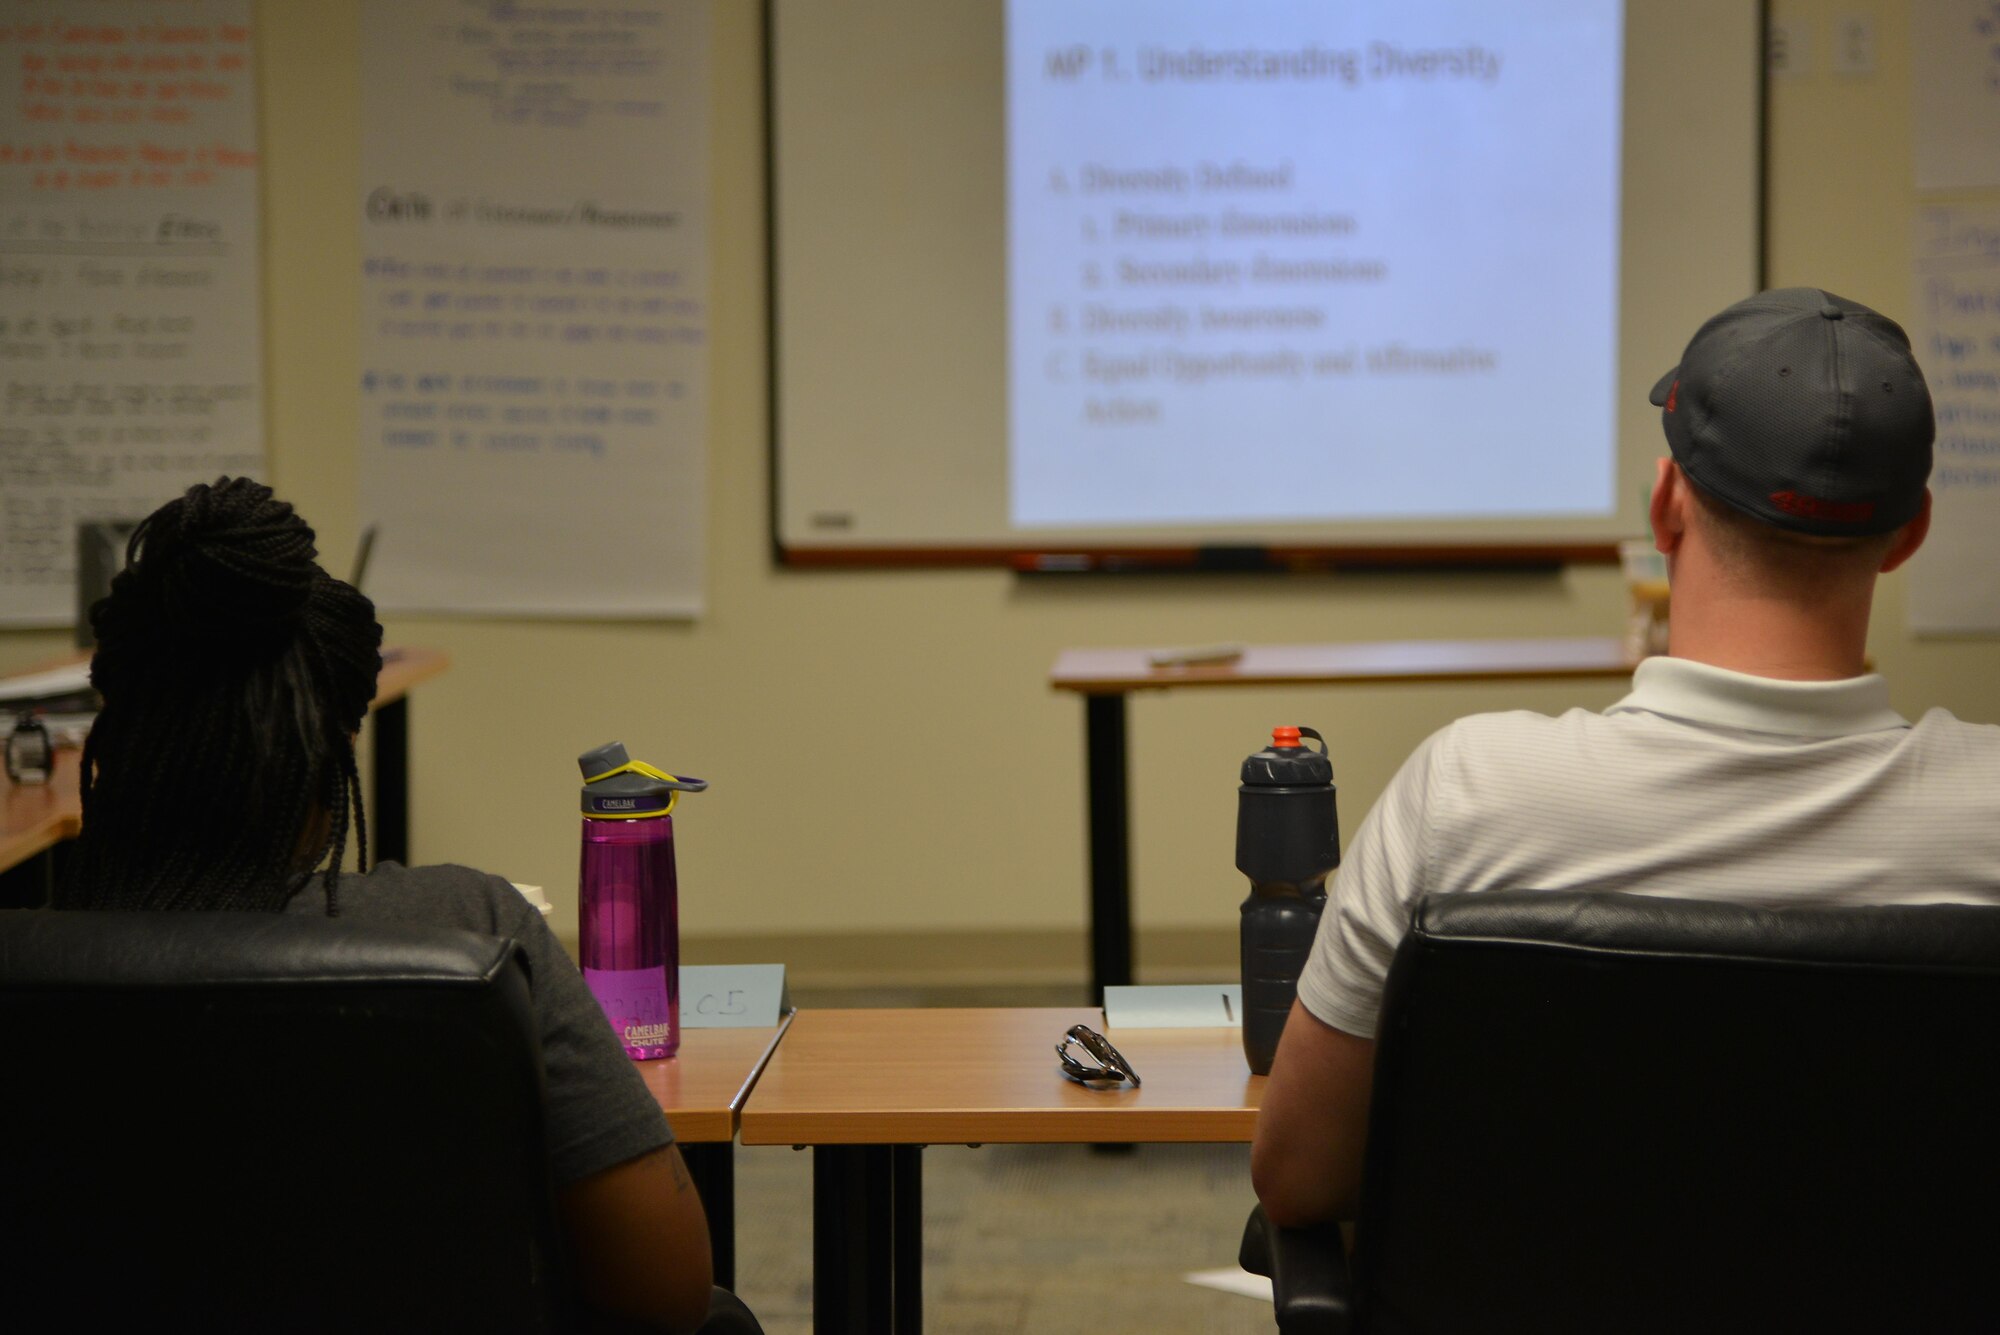 Langley Air Force Base Airman Leadership School students learn about understanding diversity on Joint Base Langley-Eustis, Va.,  Aug. 4, 2017.